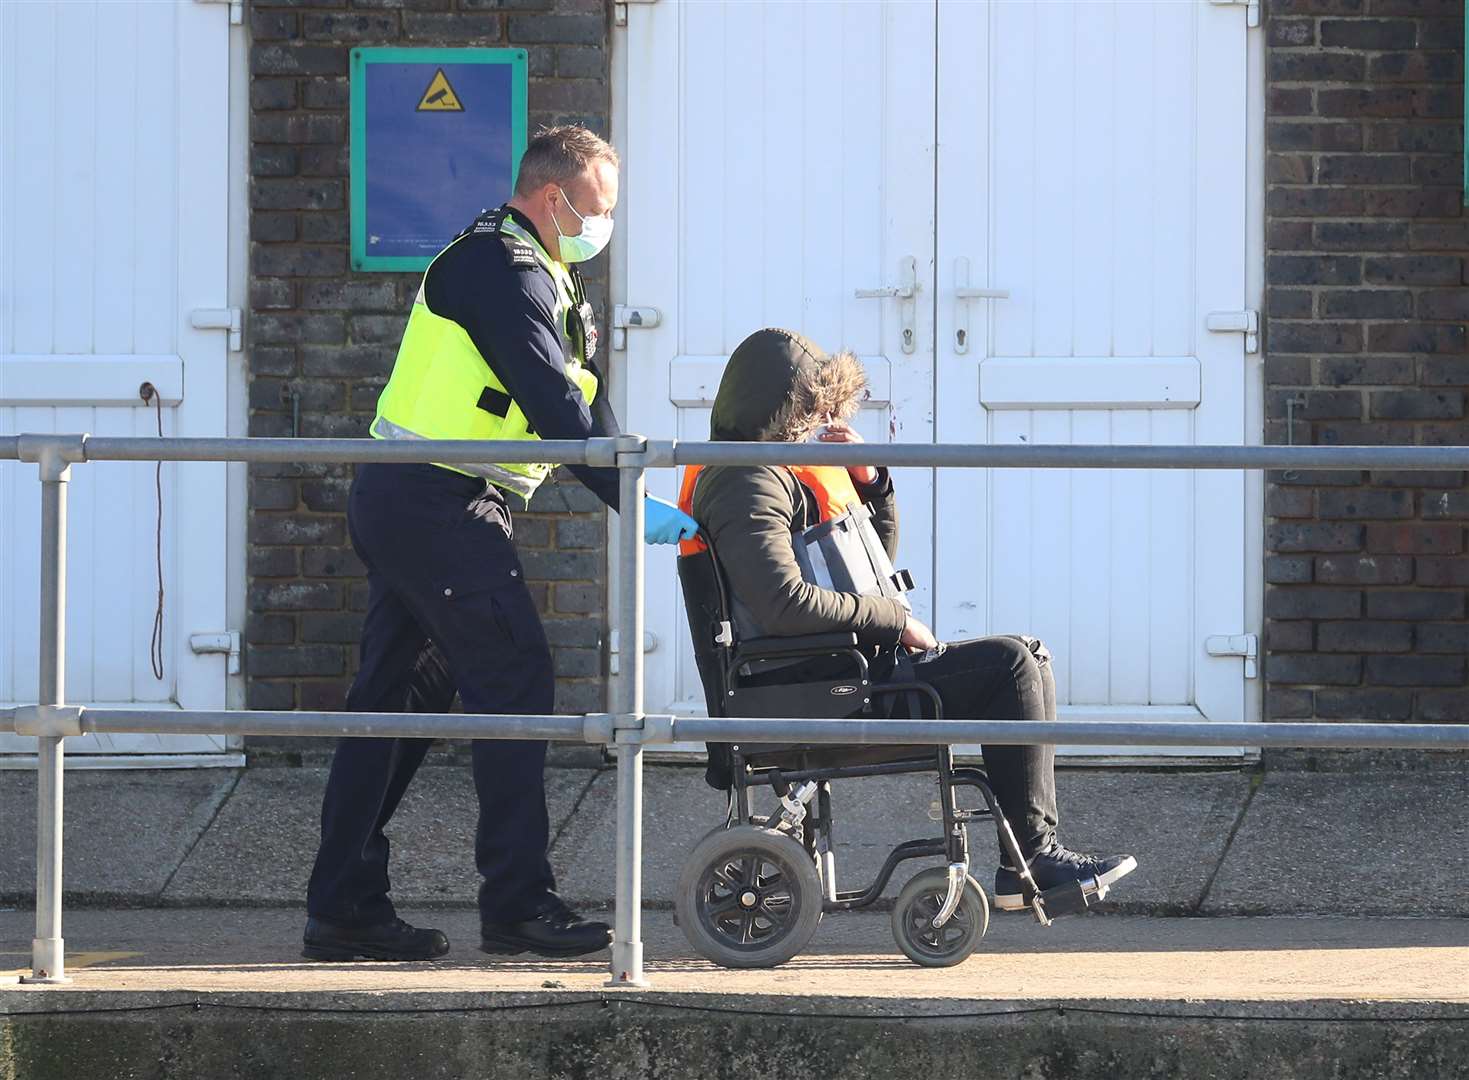 One man arriving at Dover was helped into a wheelchair by officials (Gareth Fuller/PA)